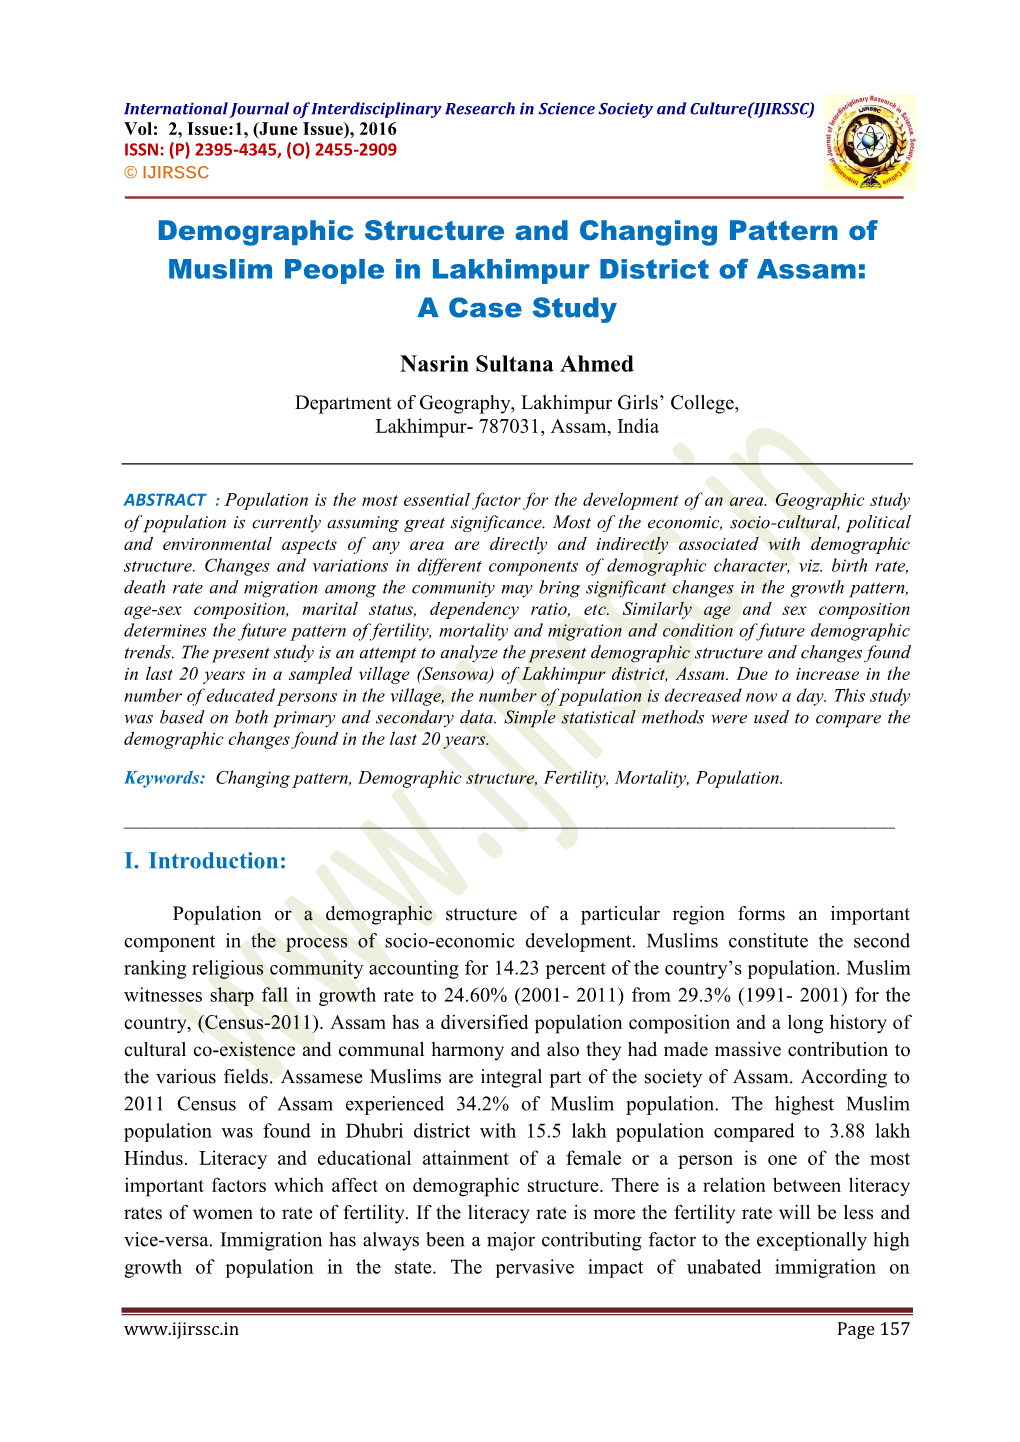 Demographic Structure and Changing Pattern of Muslim People in Lakhimpur District of Assam: a Case Study